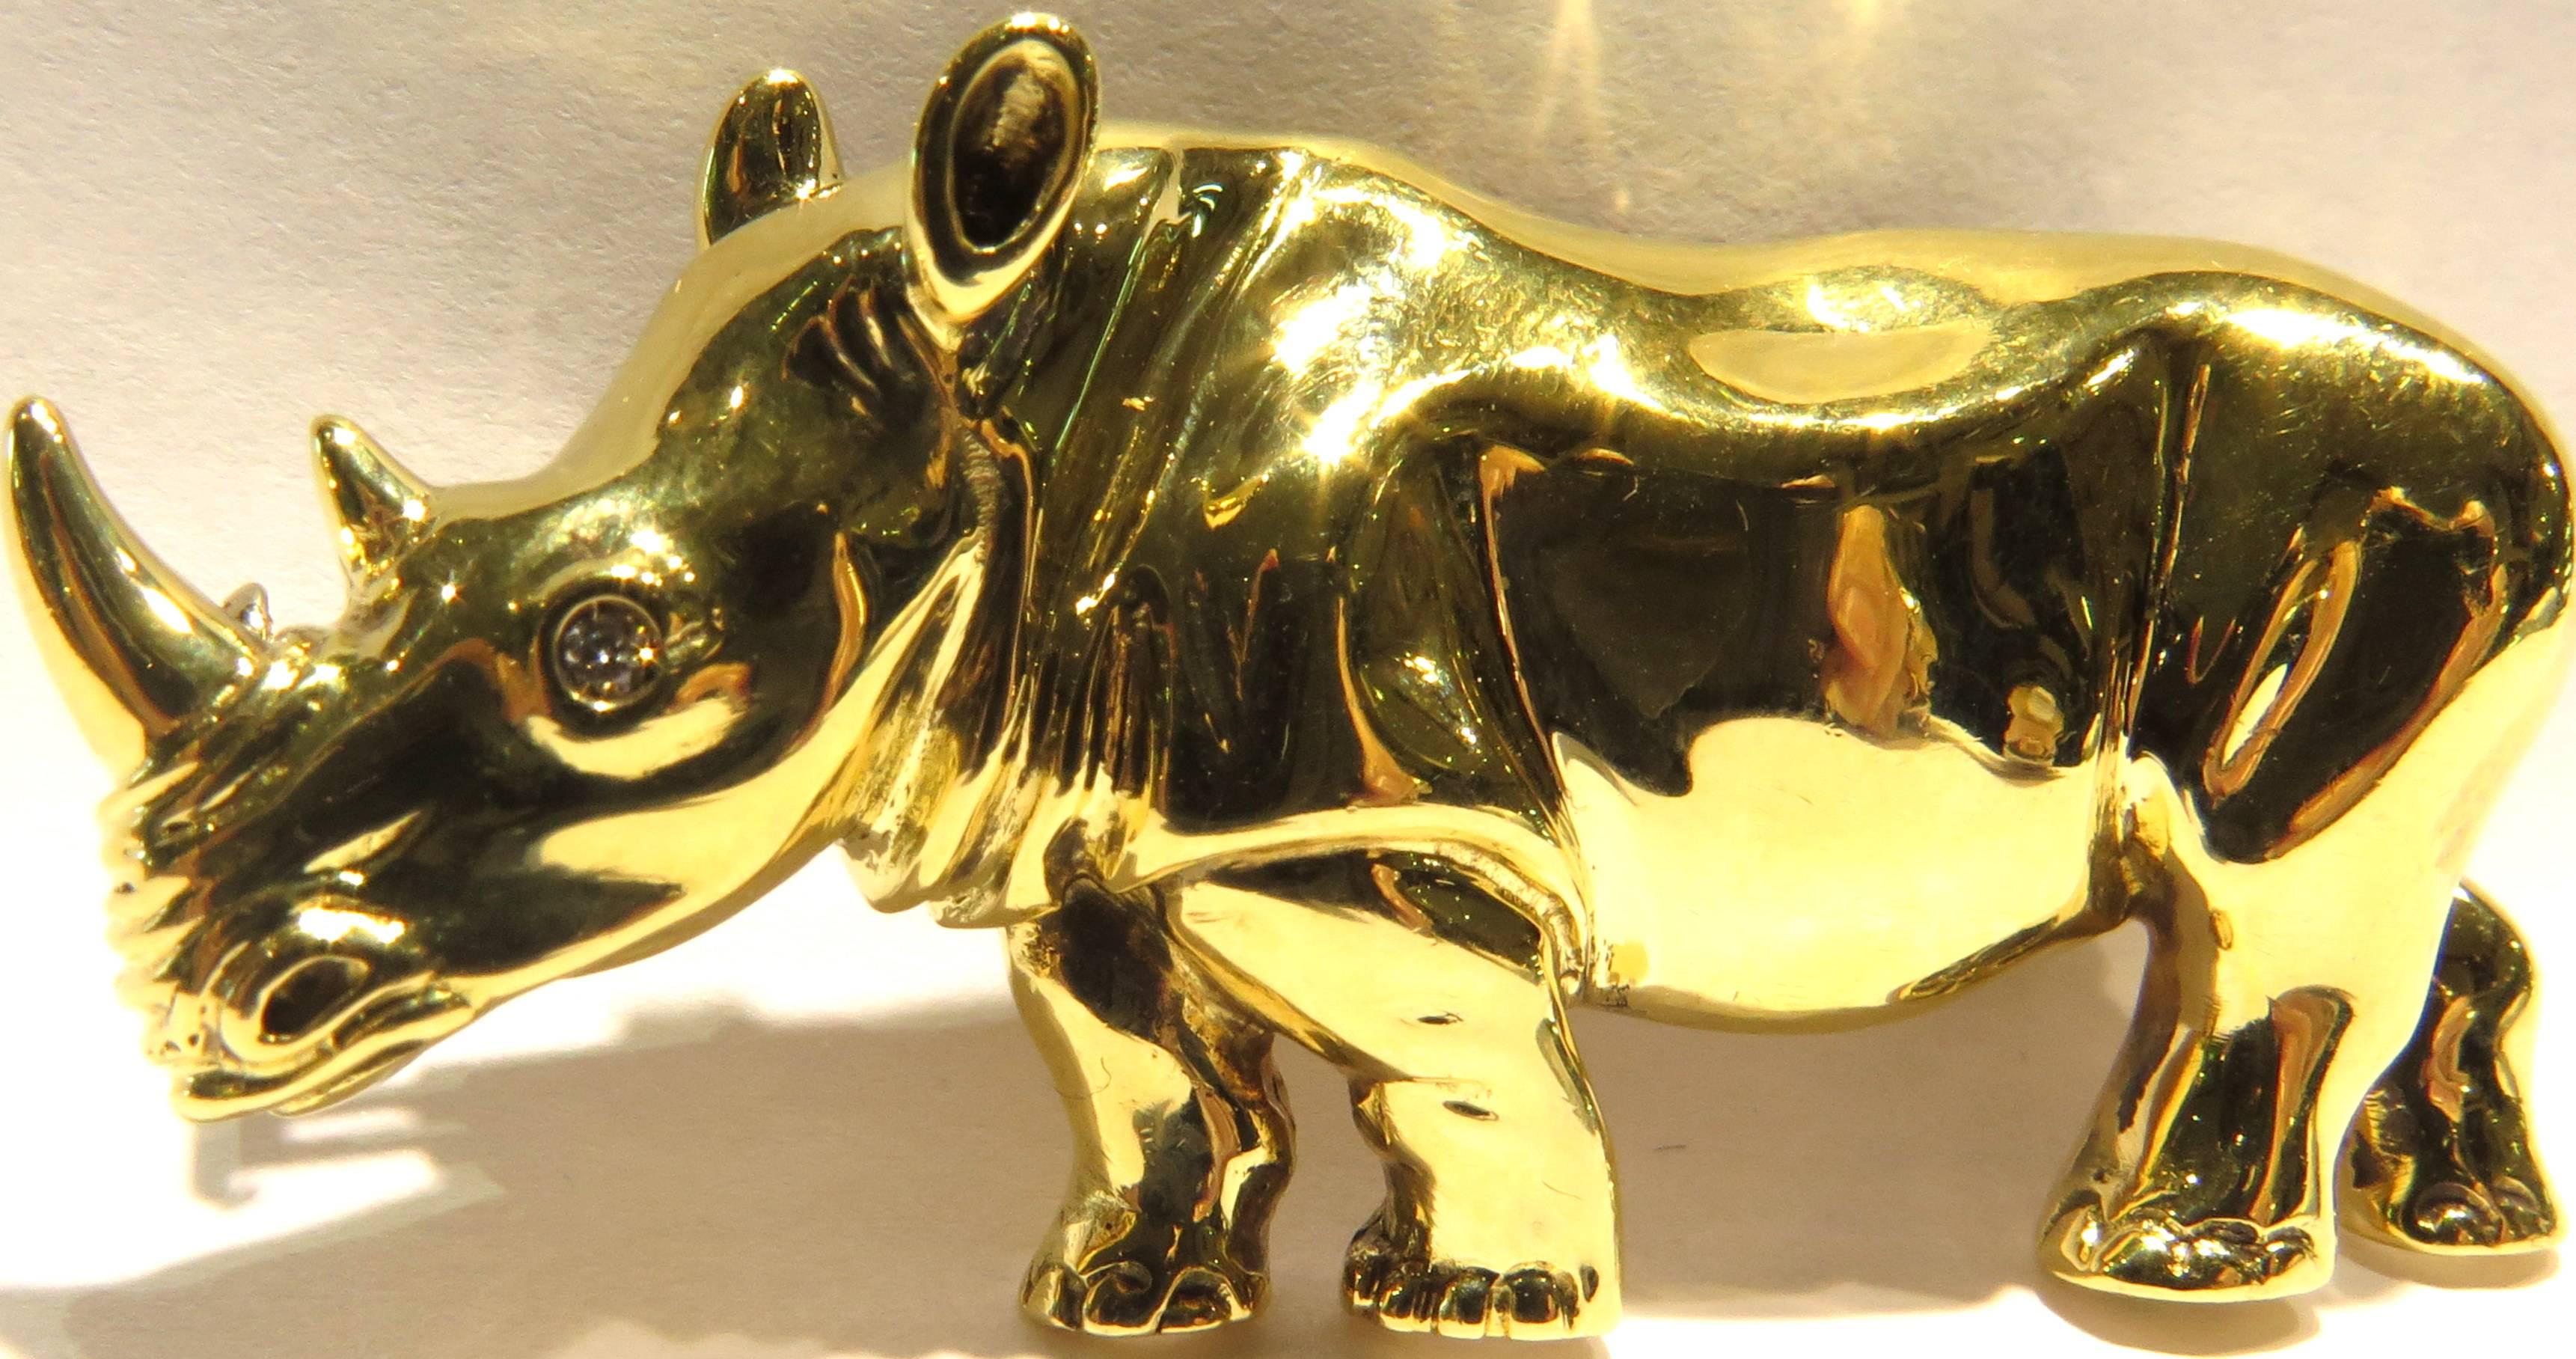 This amazing large rhino pin is set in 18k and contains 1 diamond eye. He measures 2 1/8inch wide by 1 1/8 inch high.
This pin weighs 23.3 grams.
